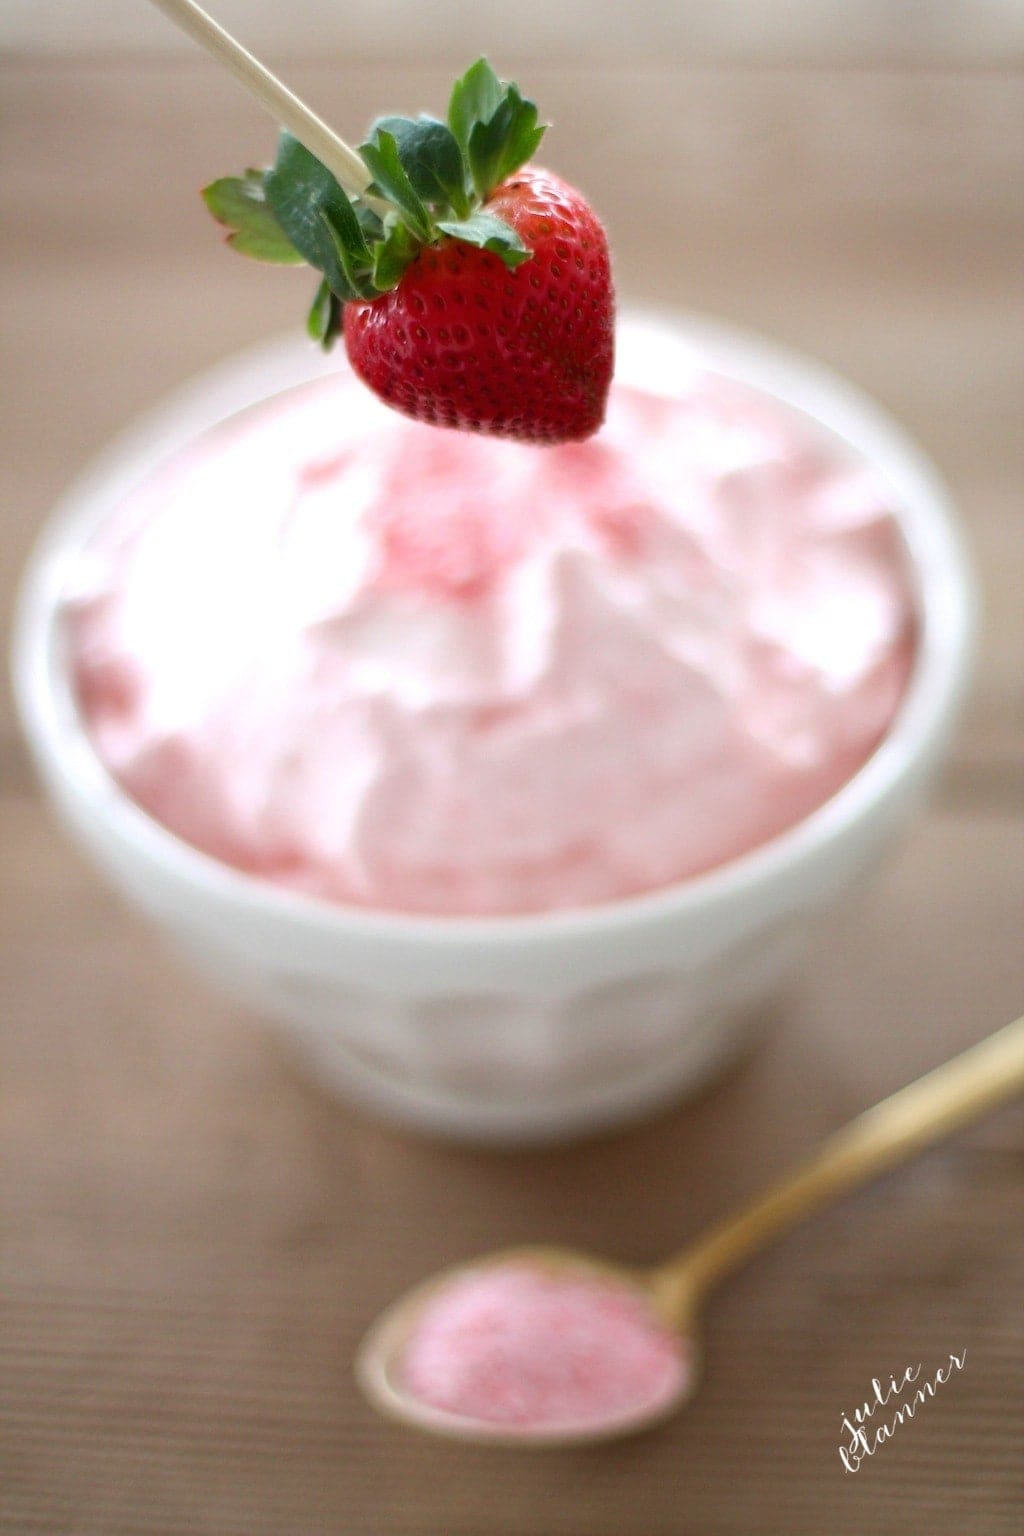 Close up of a strawberry infront of the dip